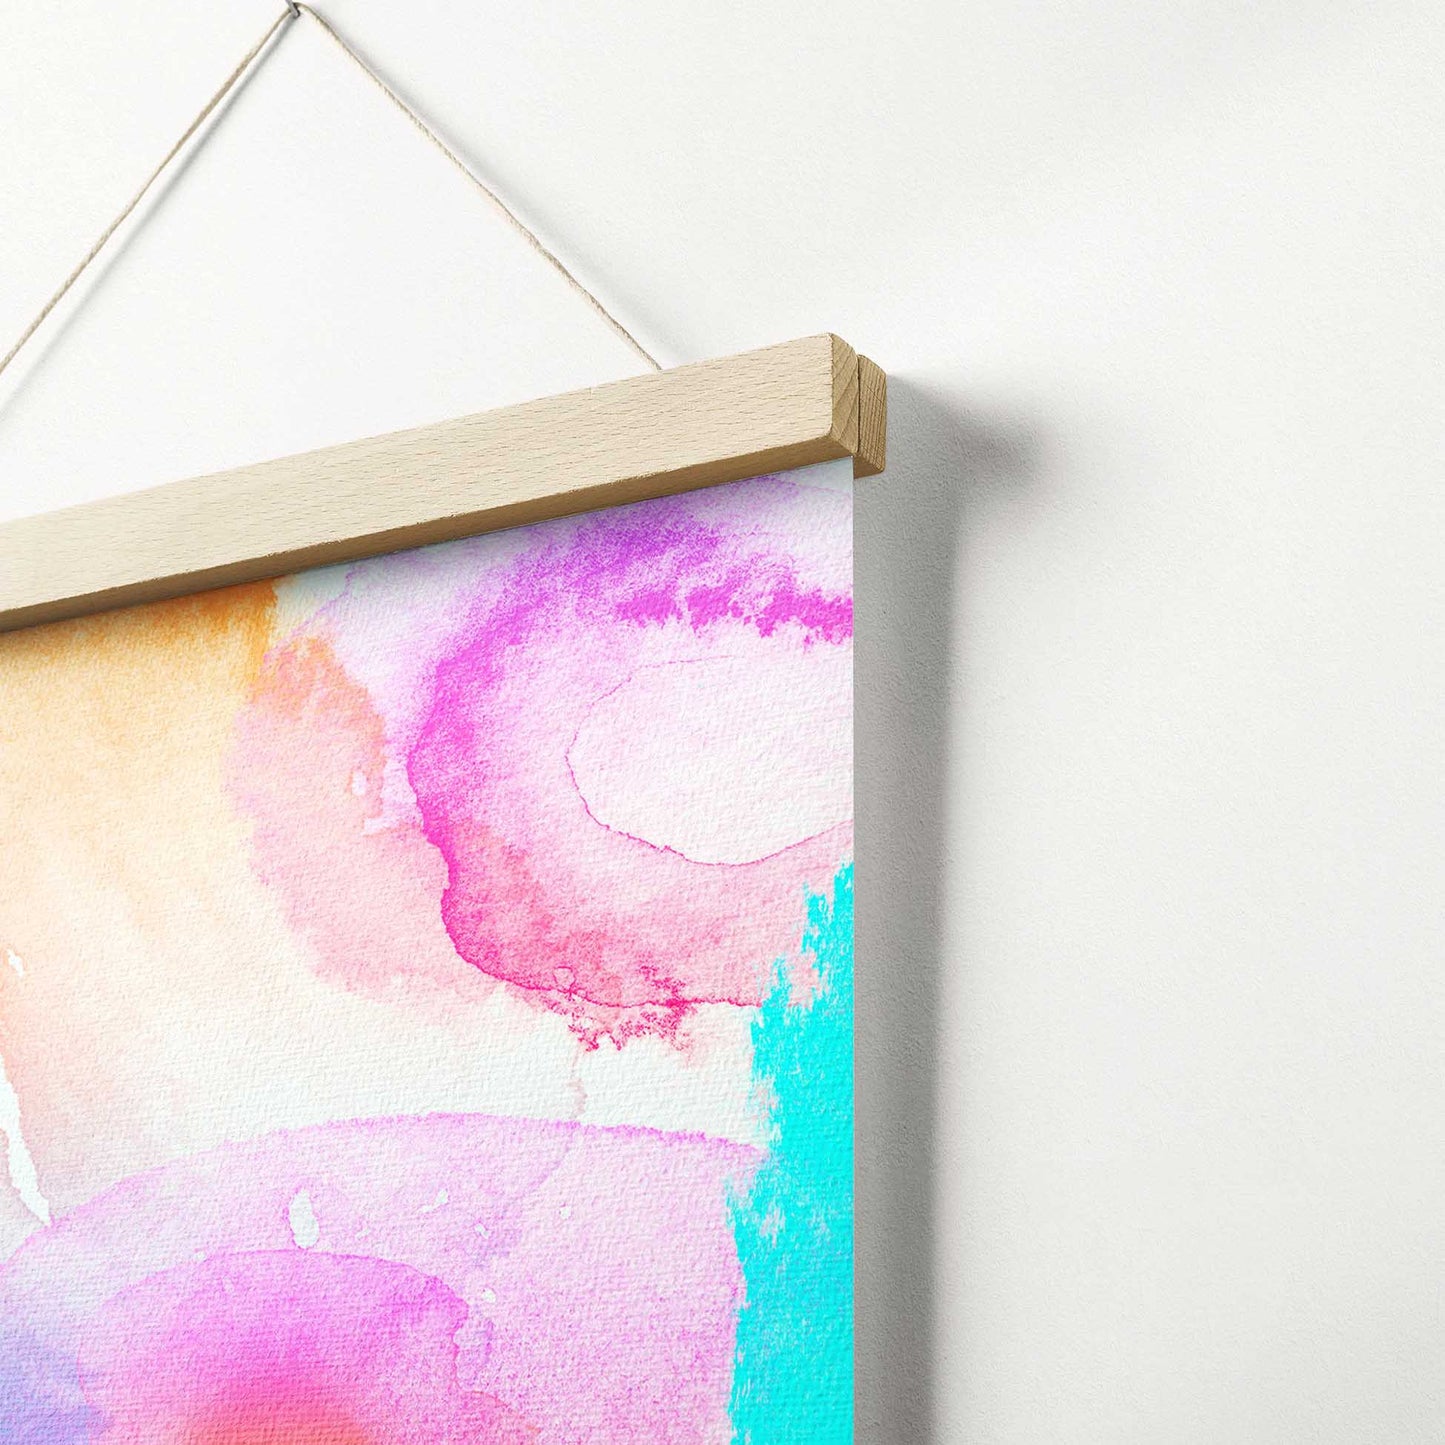 Immerse yourself in the beauty of the past with the Personalised Vintage Gouache Poster Hanger. This elegant wall art showcases a painting created from your photo, transformed with a vintage watercolor effect